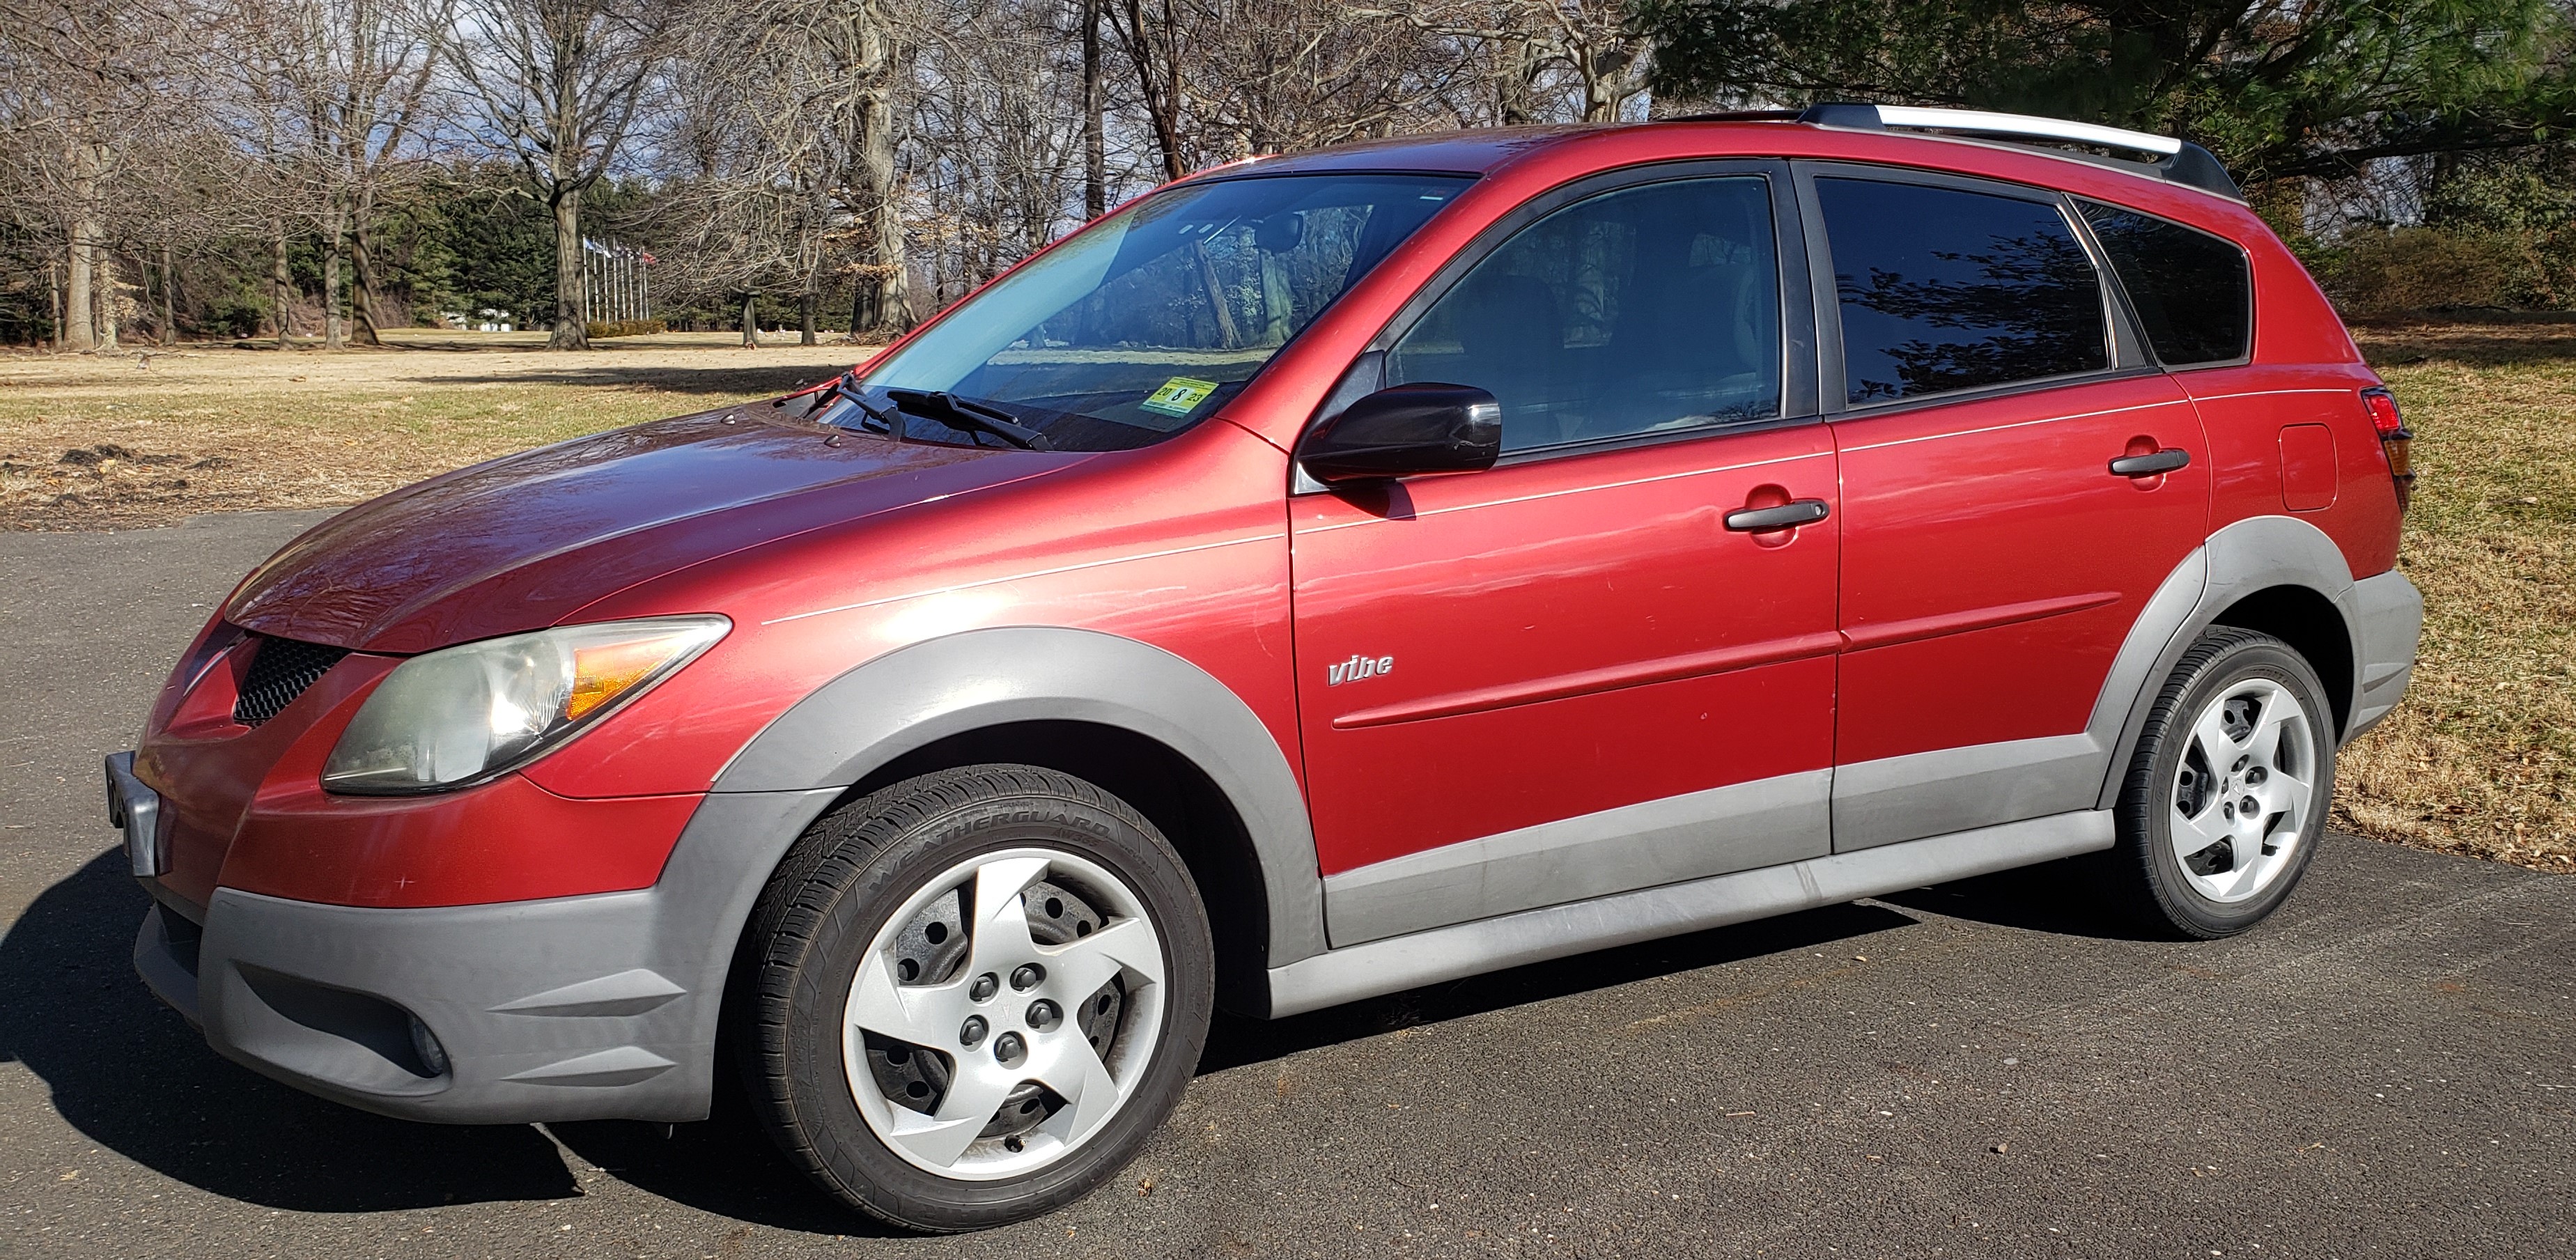 Used Pontiac Vibe for Sale in Ambler, PA | Cars.com